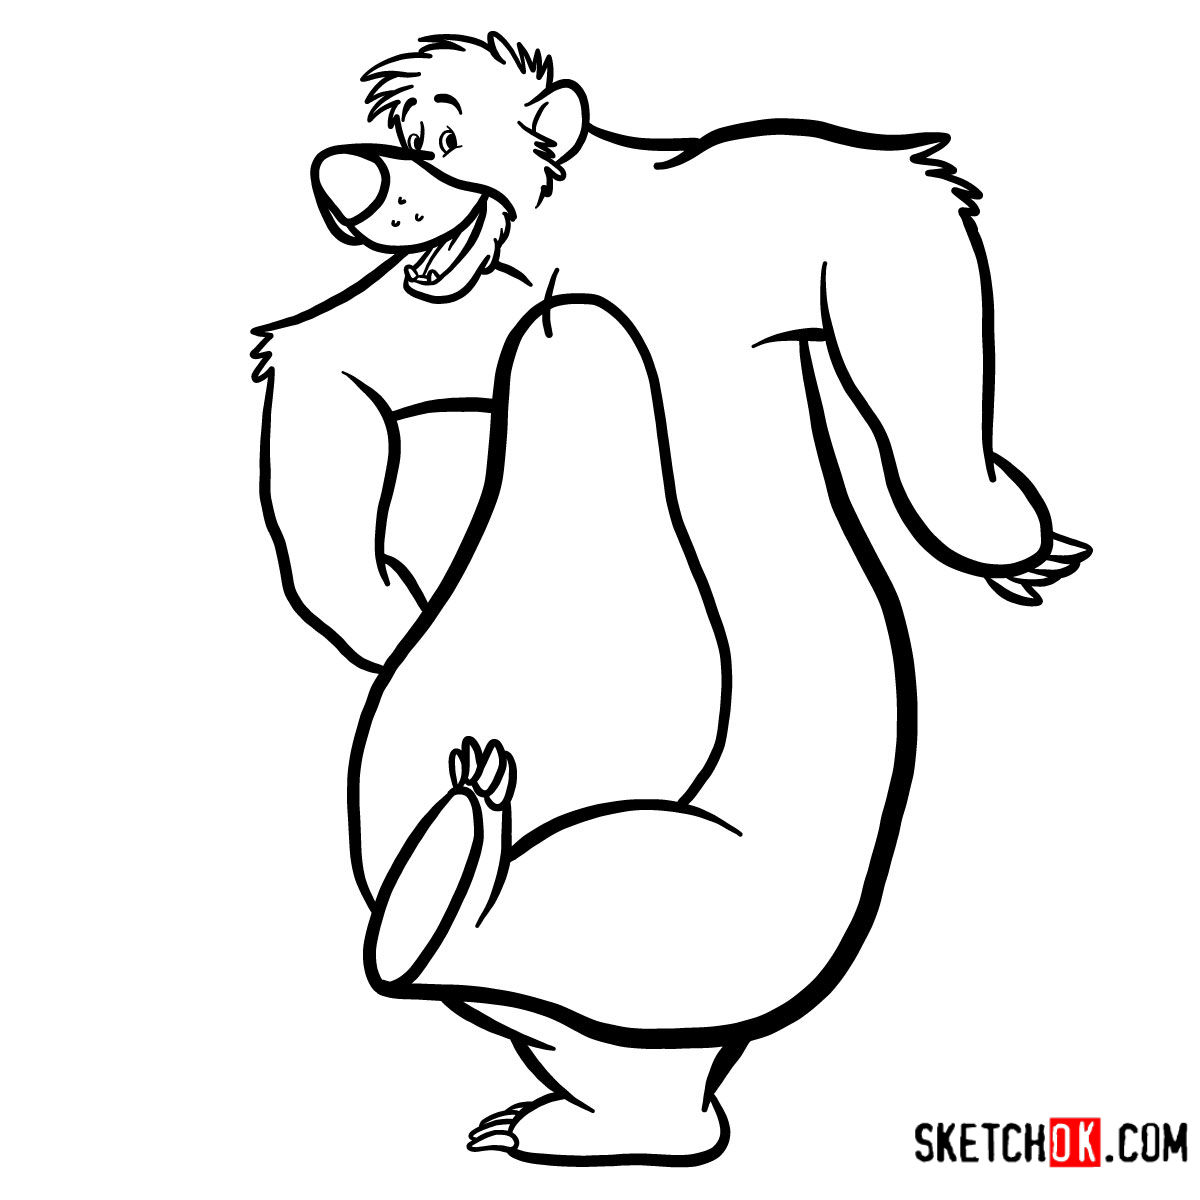 How to draw Baloo from the Jungle Book - step 12